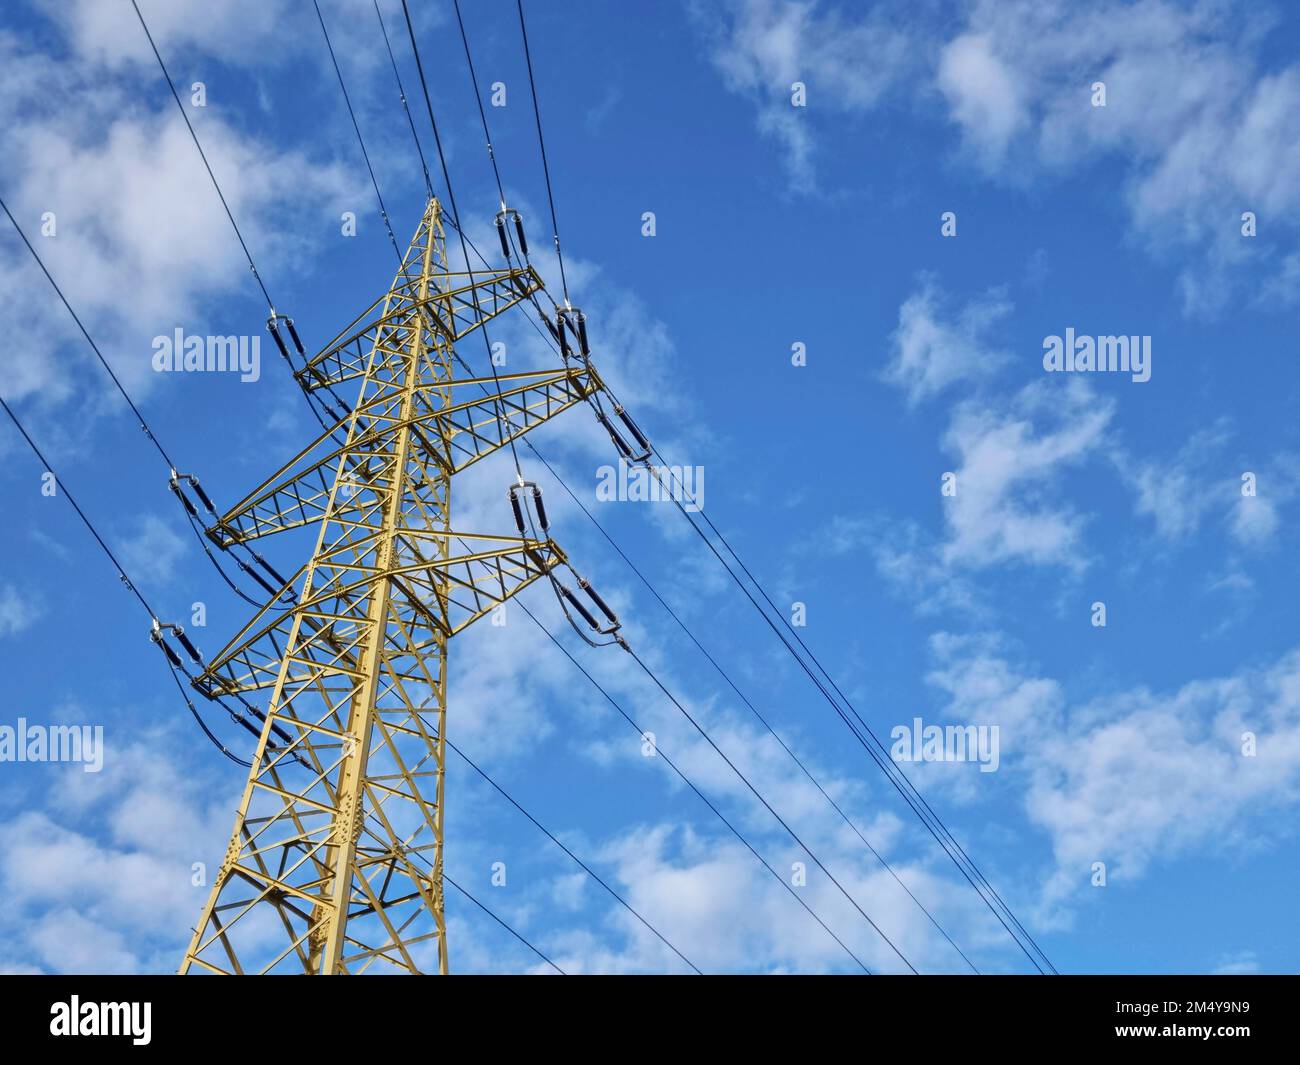 High voltage electric pole and power lines, high voltage electric transmission tower and blue cloudy sky Stock Photo